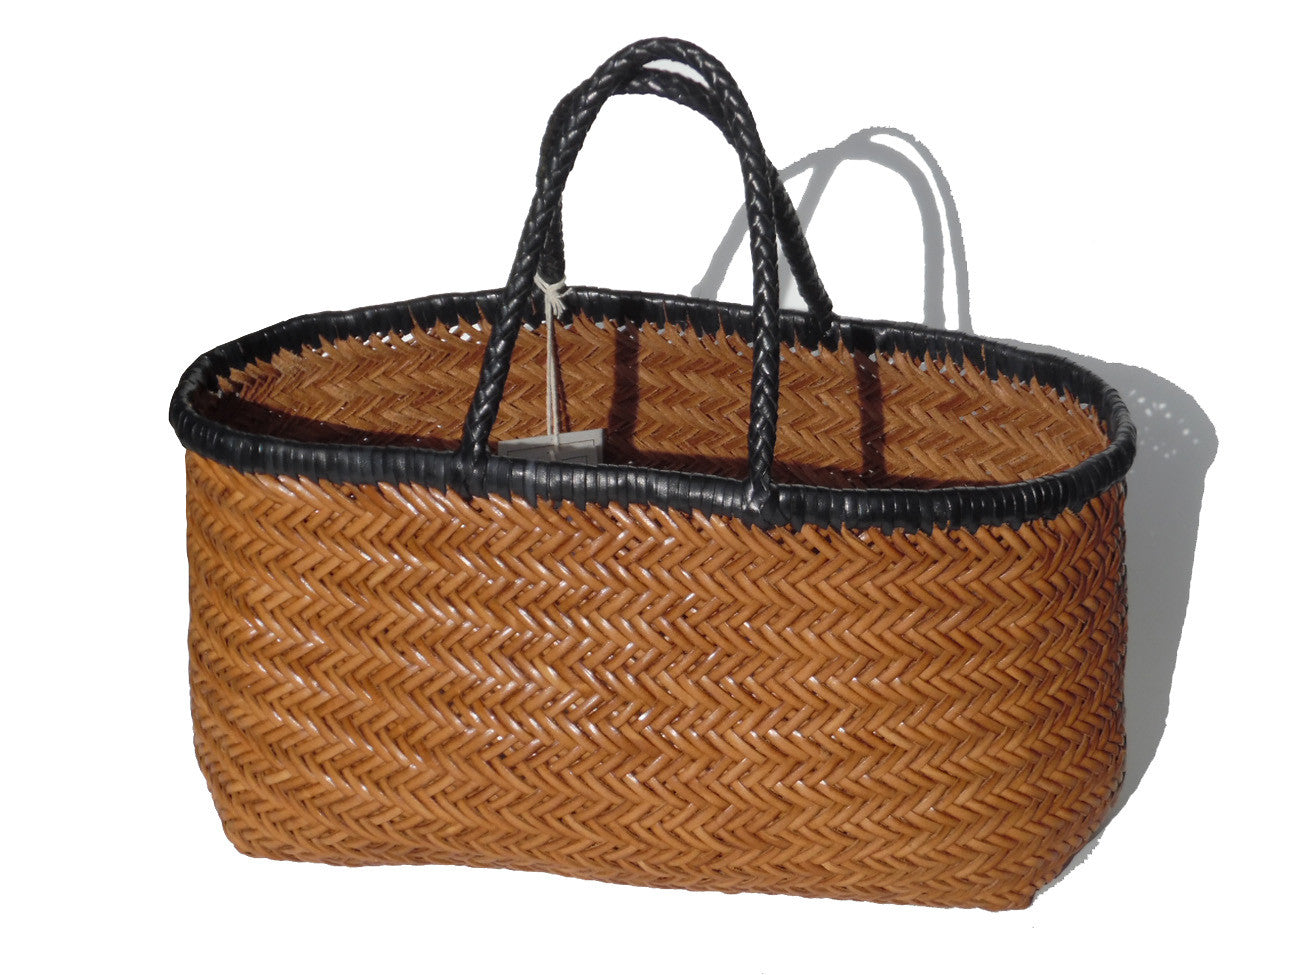 Woven Leather Market Tote - Advance Orders